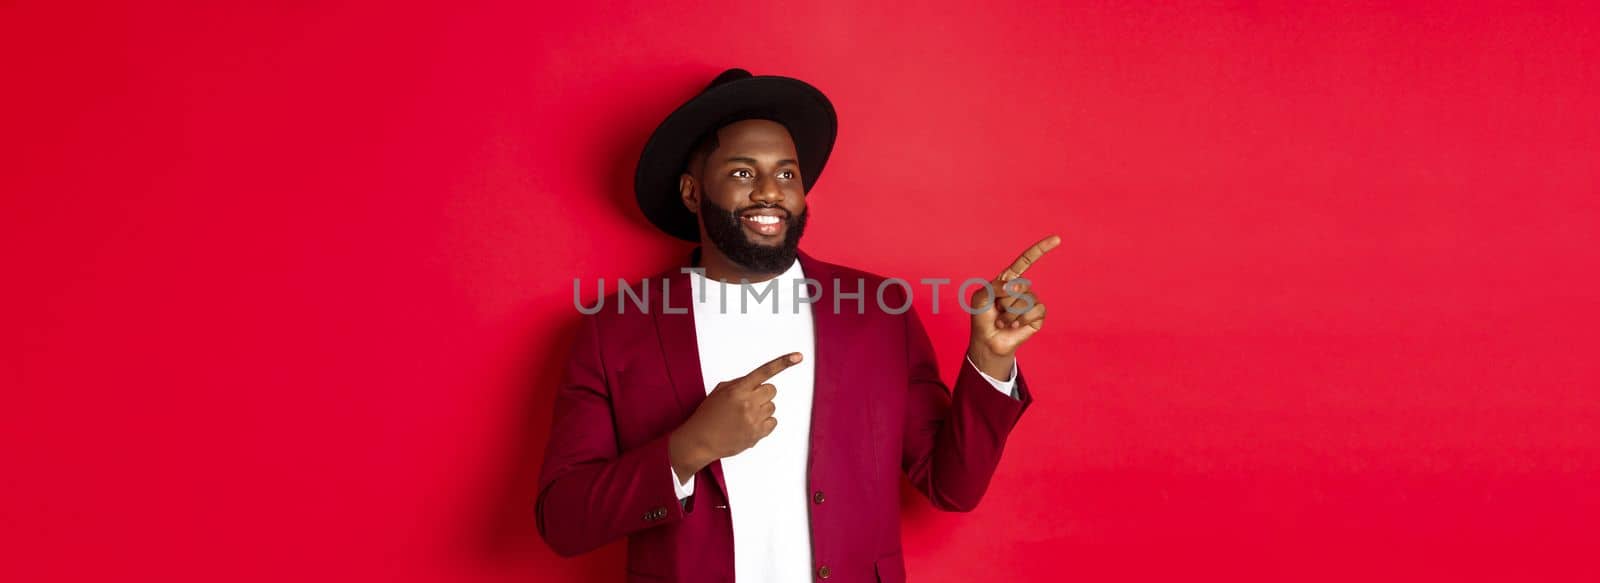 Winter holidays and shopping concept. Happy Black man pointing left and smiling, showing new year promo offer on red background.